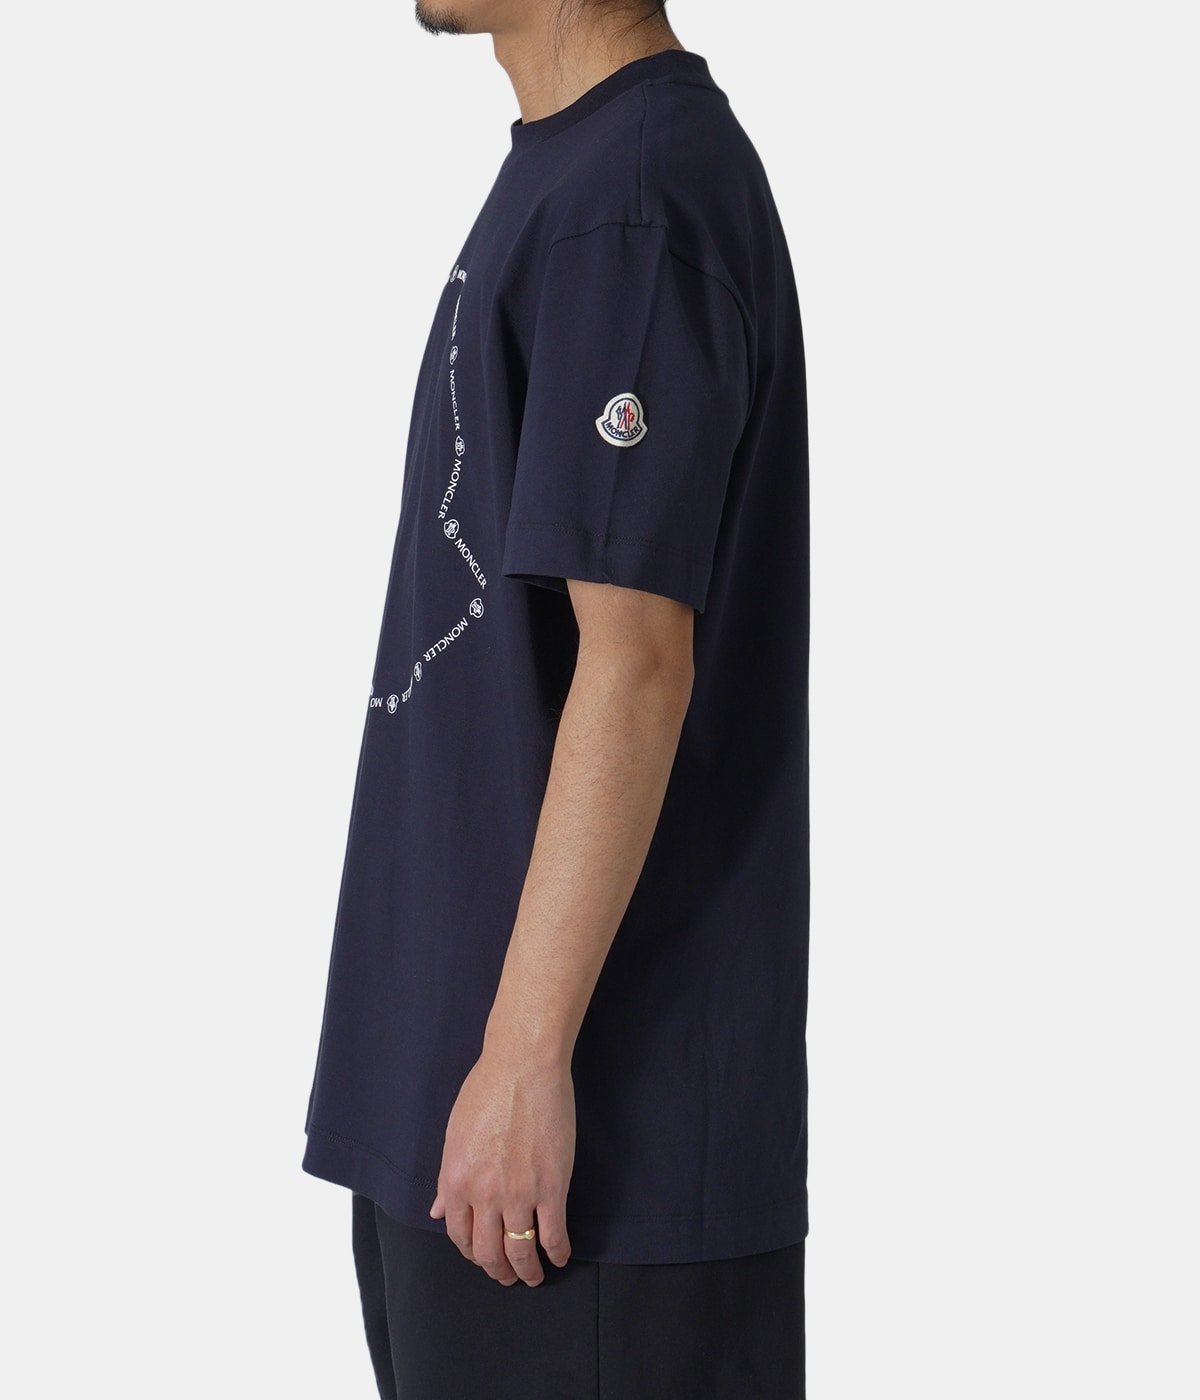 SS T-SHIRT | MONCLER(モンクレール) / トップス カットソー半袖・T 